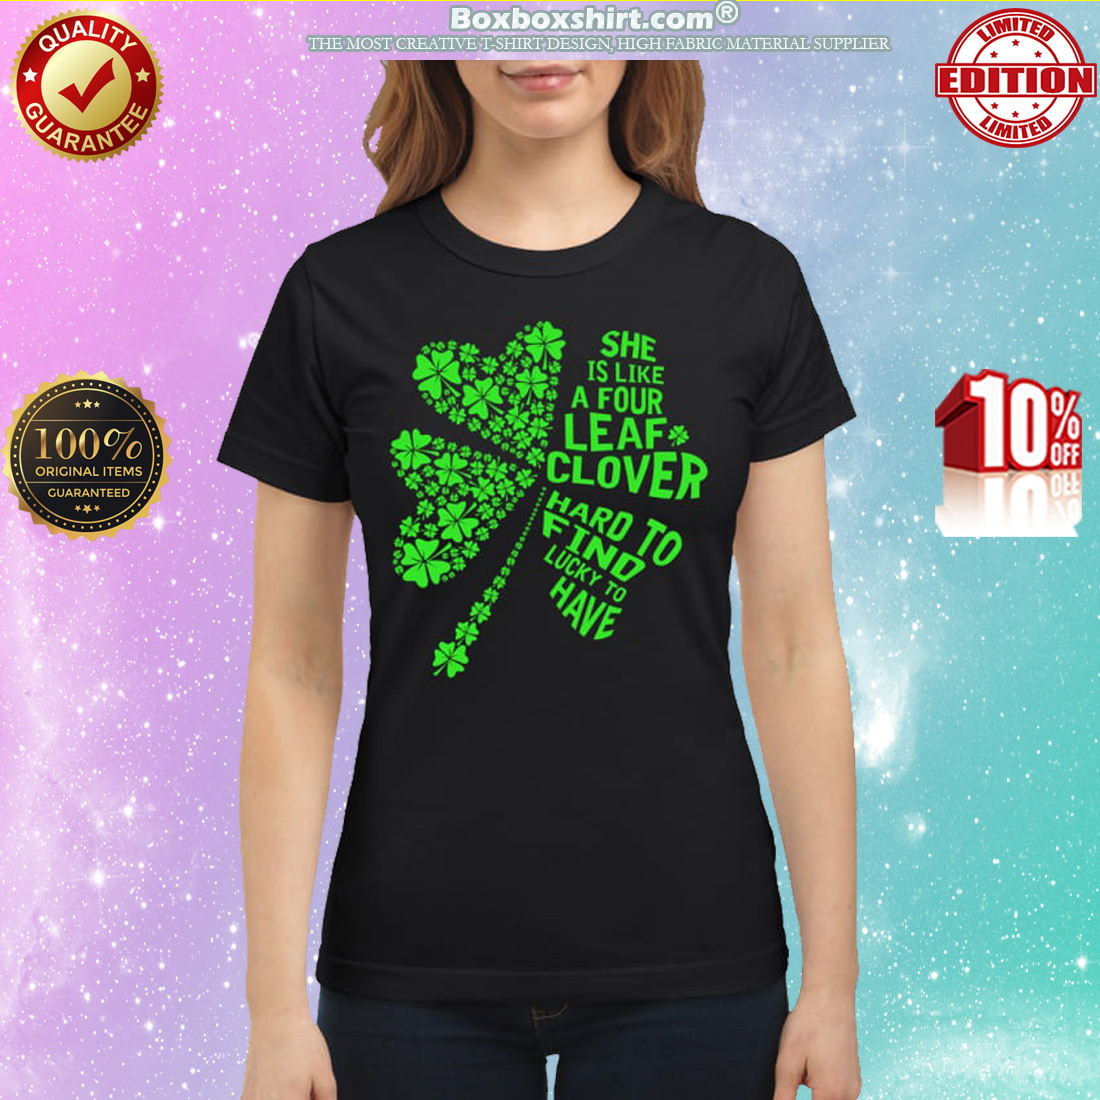 she is like a four leaf clover hard to find lucky to have classic shirt